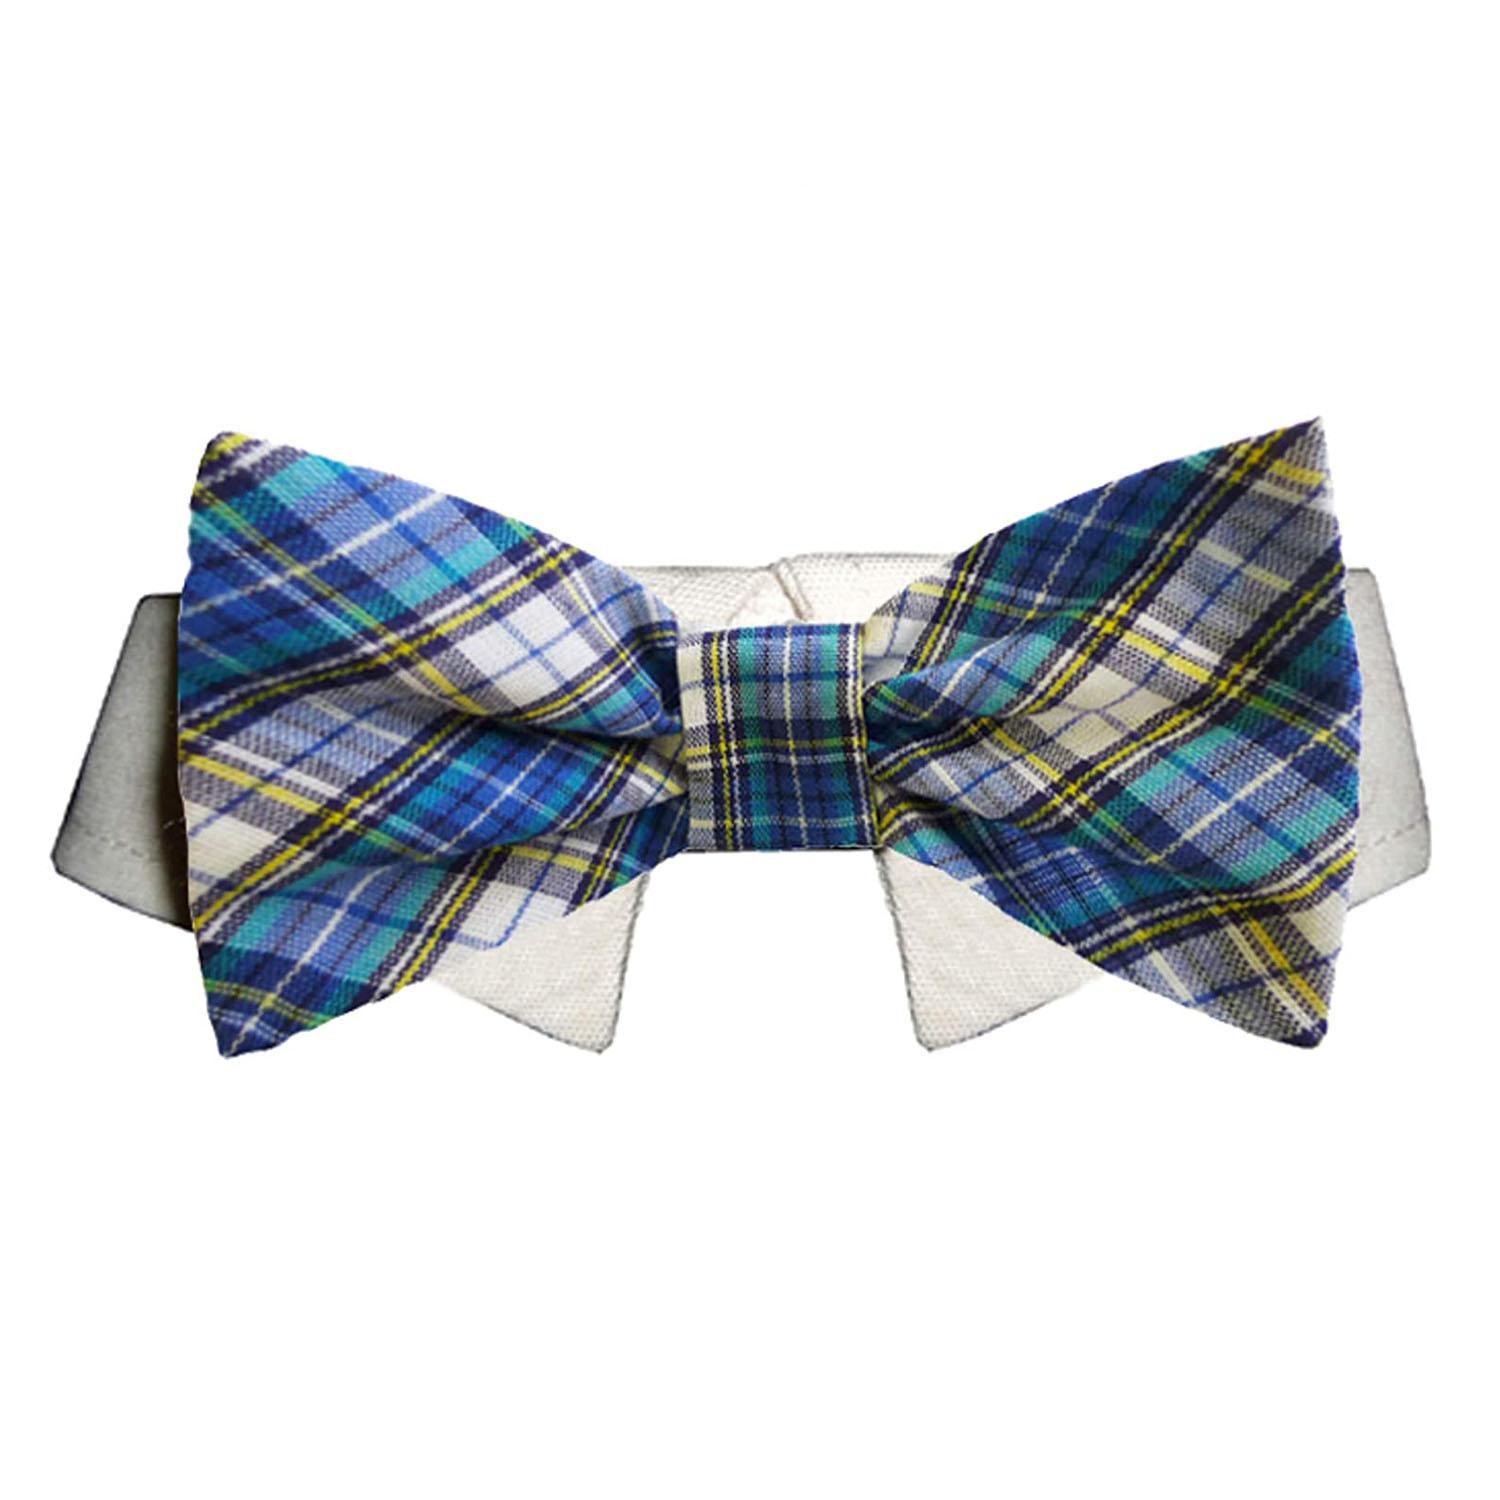 Pooch Outfitters Isaac Dog Shirt Collar and Bow Tie - Blue and Yellow Plaid